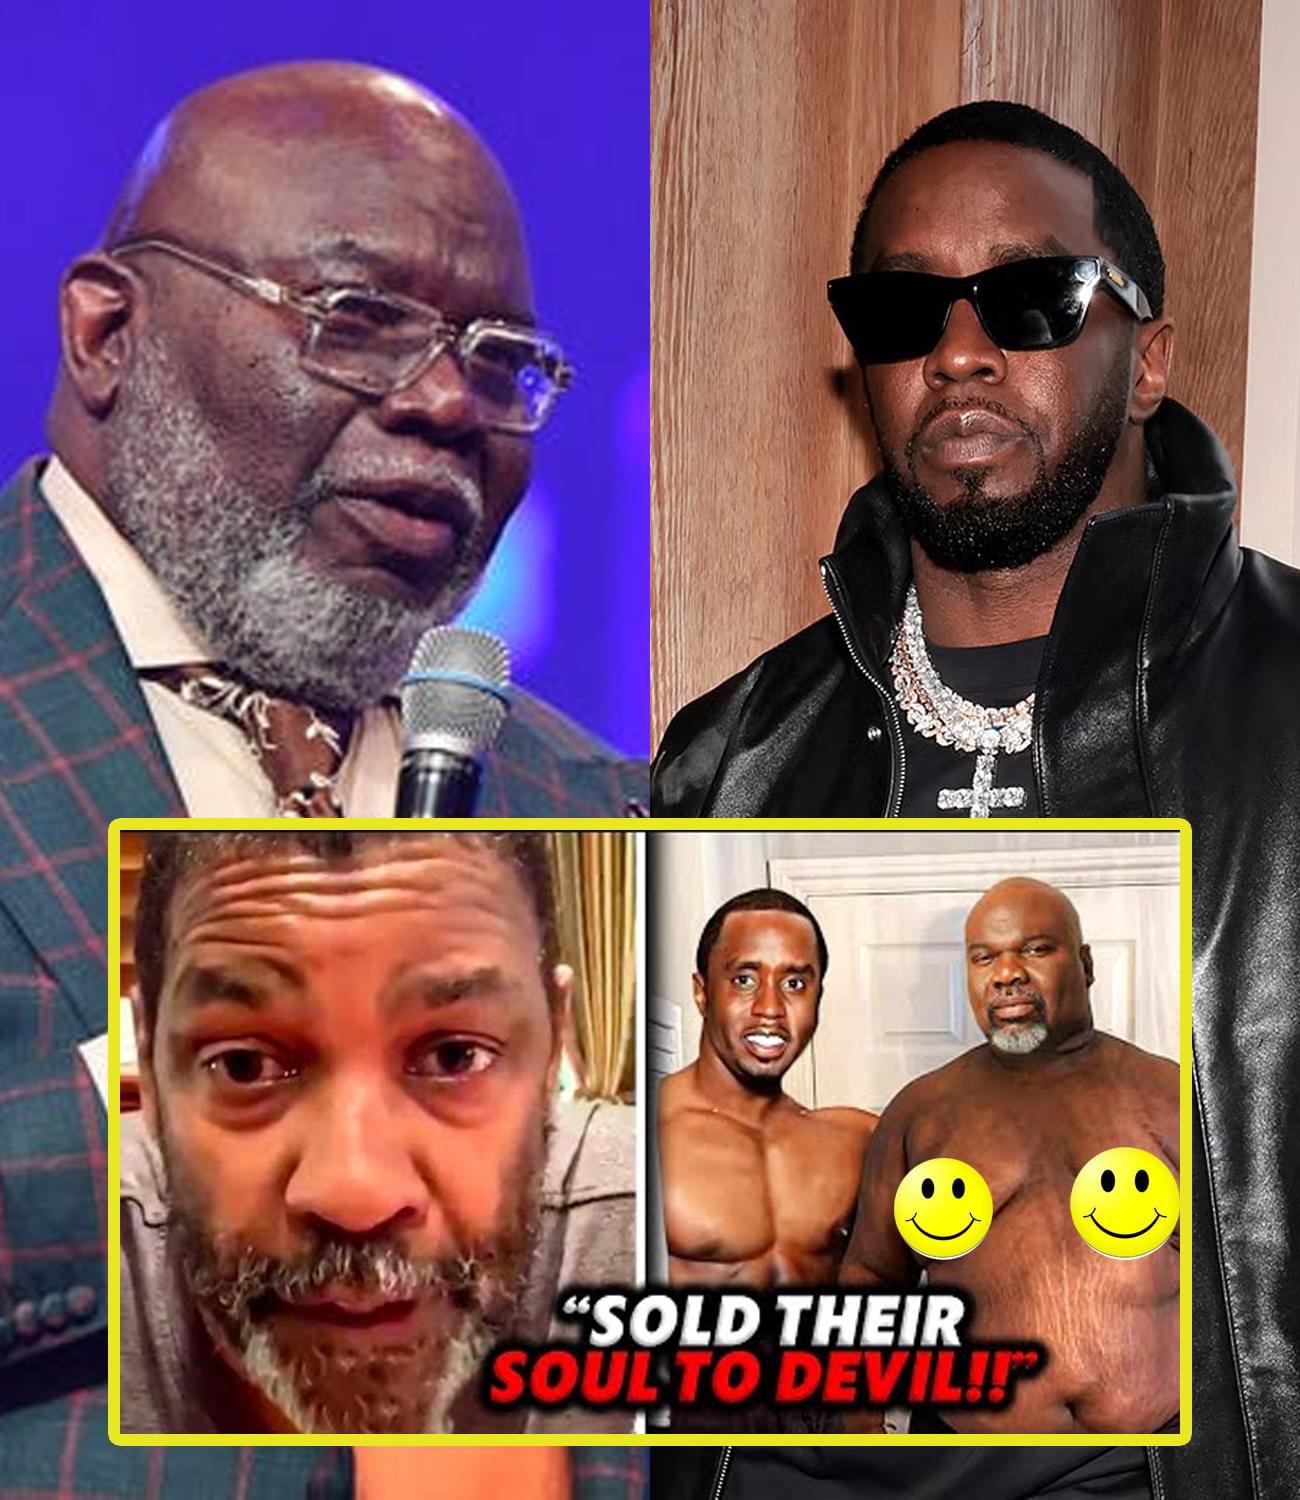 7 MINUTES AGO: Denzel Washington WARNING US About T.D Jakes And Diddy!